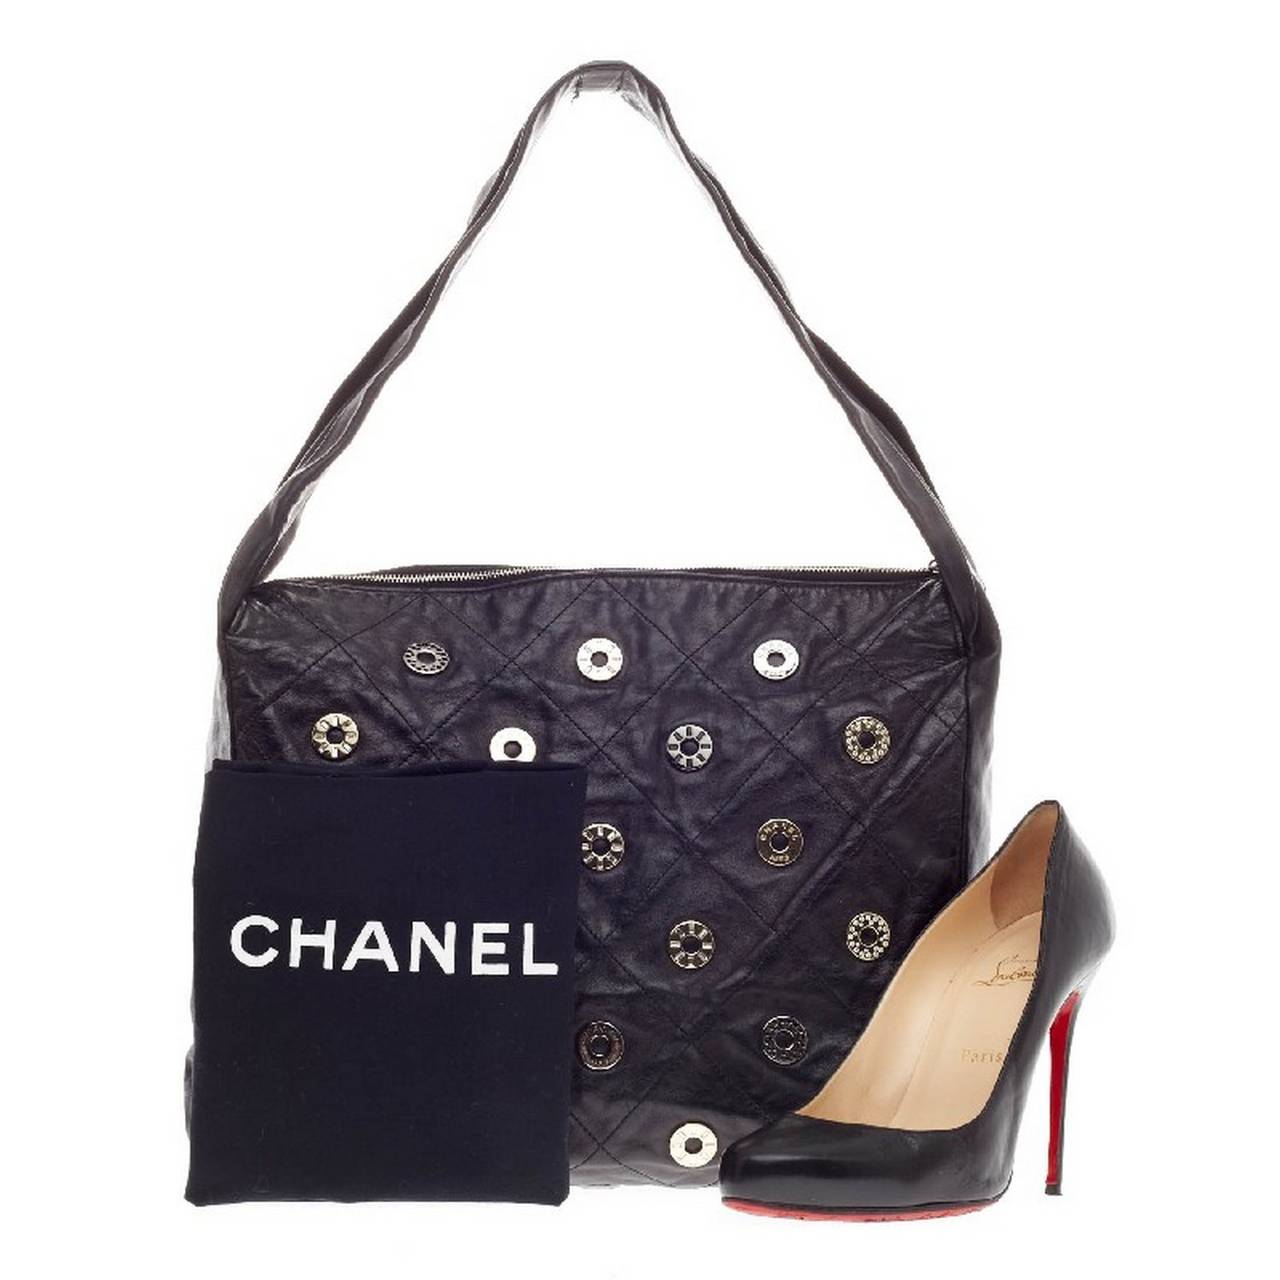 This authentic Chanel Snaps Zip Hobo Leather is a great everyday accessory for the on-the-go woman. Crafted from soft black diamond quilted leather, this no-fuss hobo is designed with decorative Chanel snap studs on its exterior and silver-tone